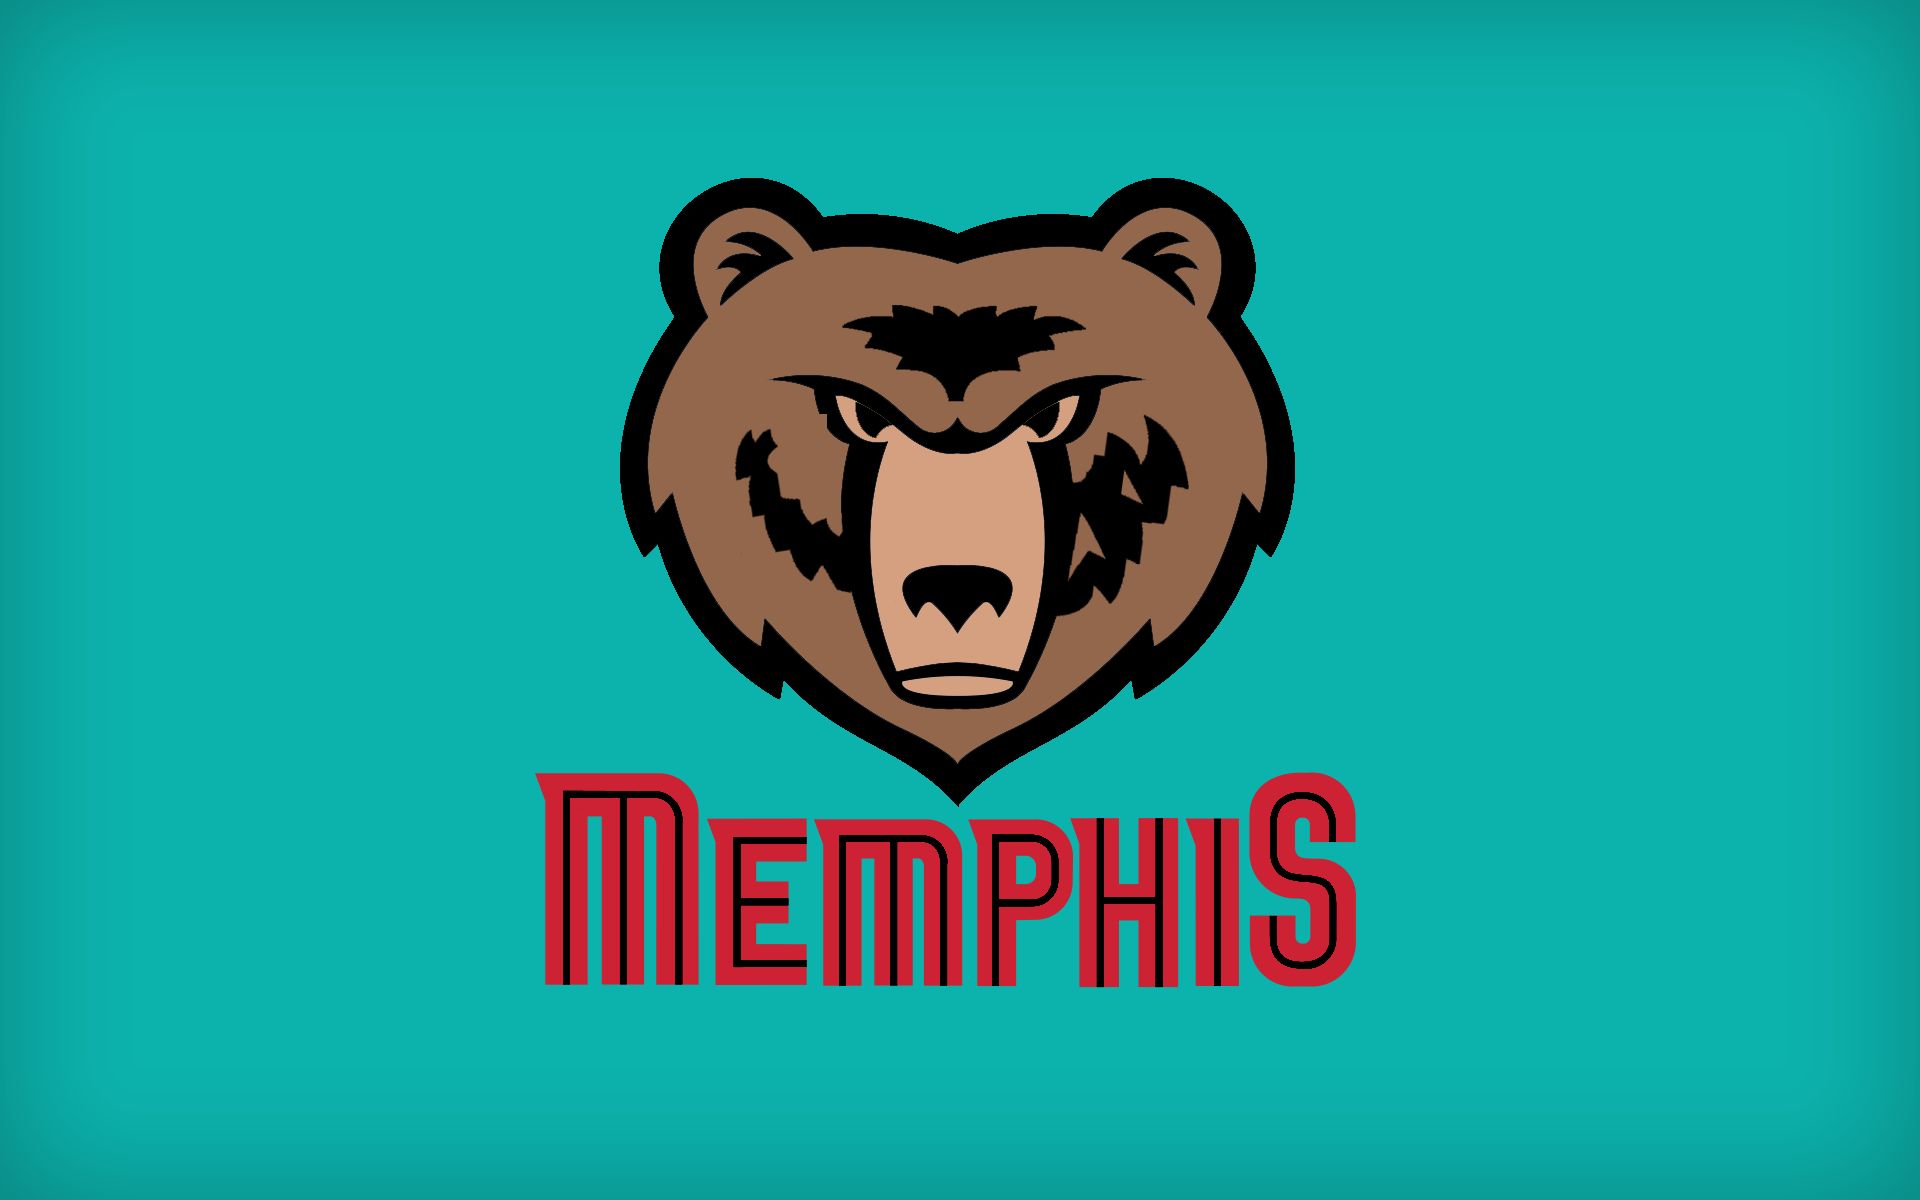 Mobile wallpaper: Sports, Basketball, Emblem, Nba, Memphis Grizzlies,  502803 download the picture for free.